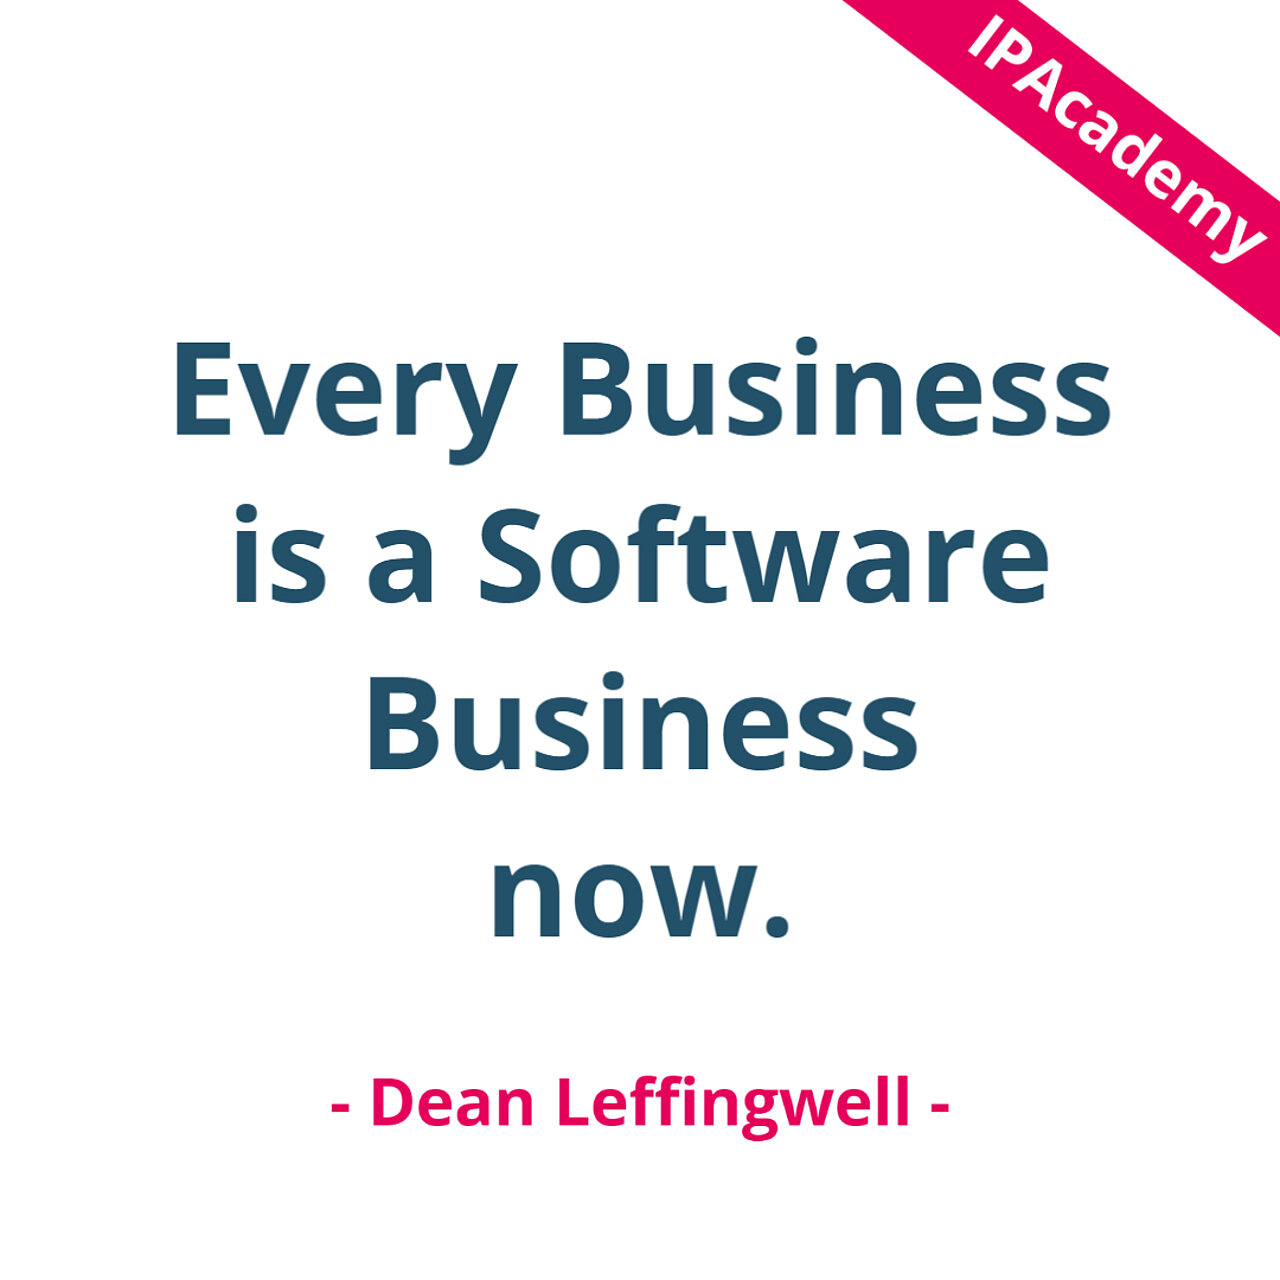 Every Business is a Software Business